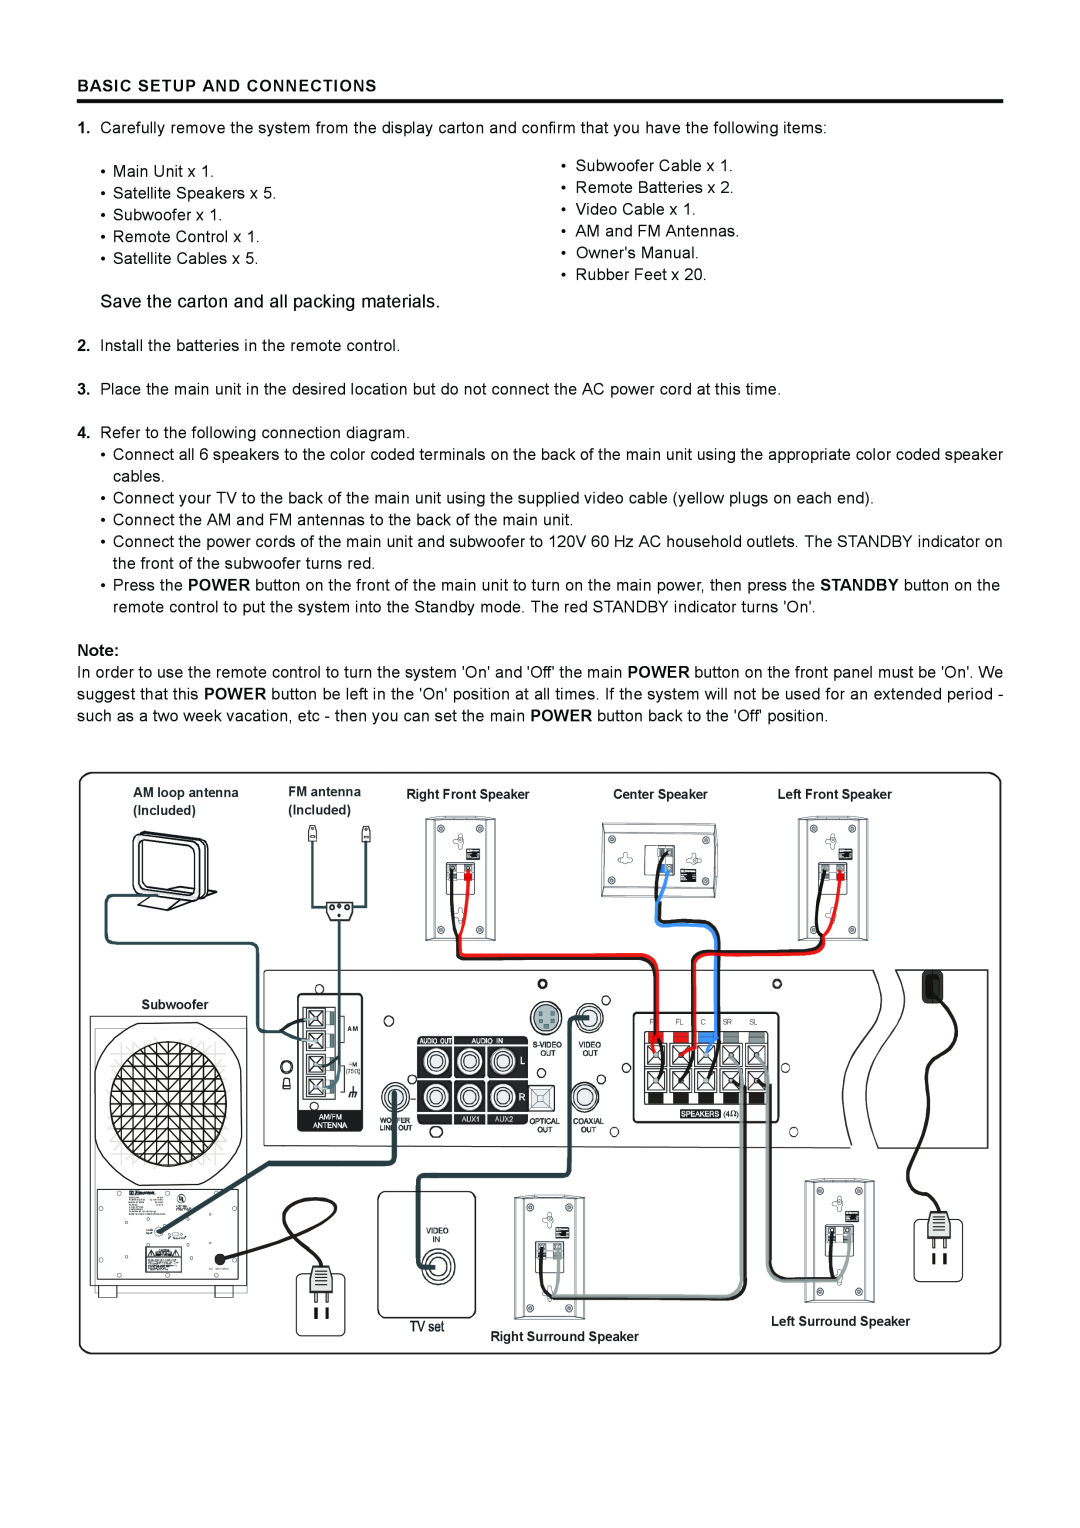 Emerson AV300 setup guide Save the carton and all packing materials, Basic Setup And Connections 